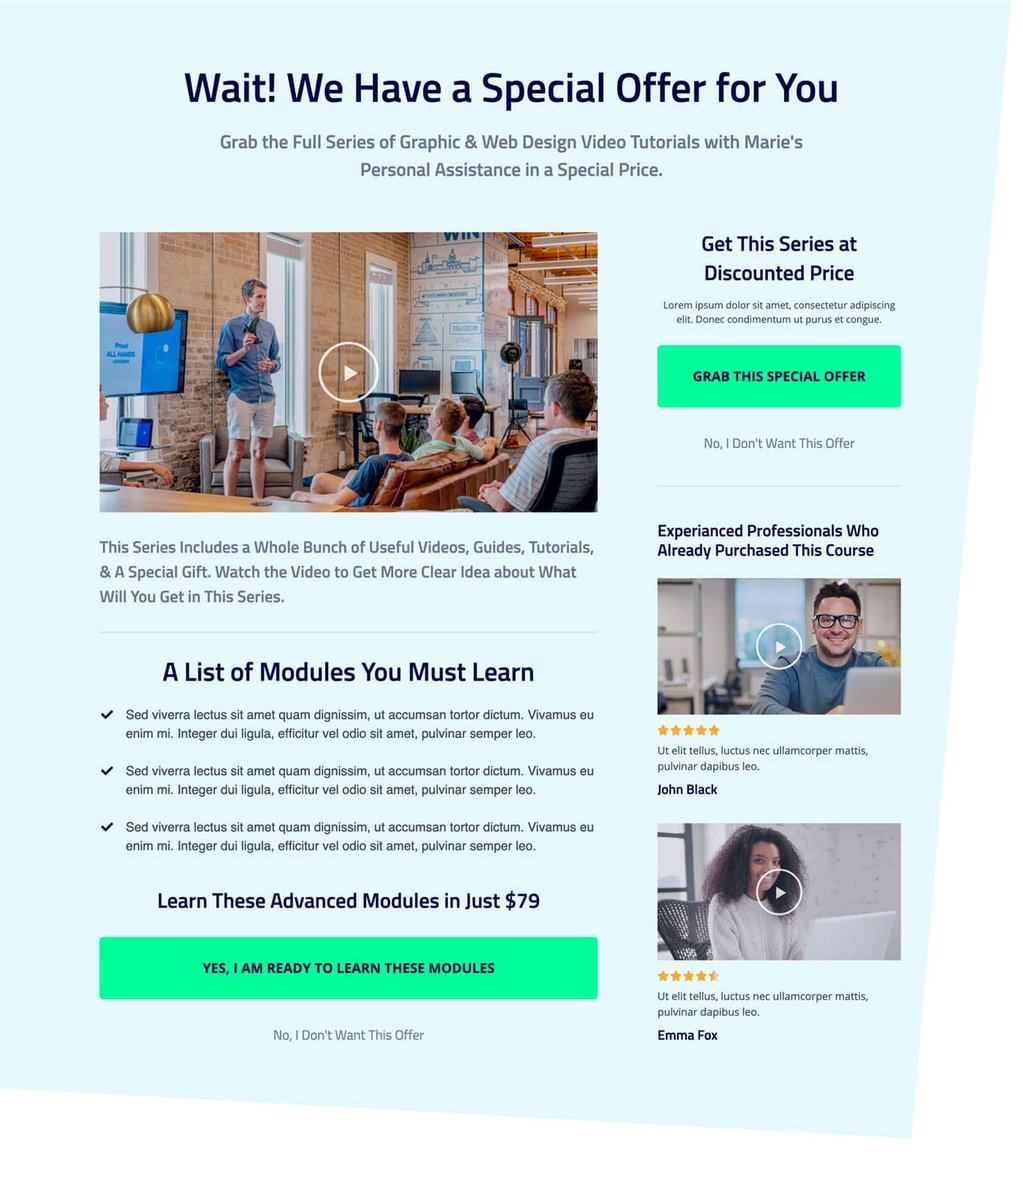 Photoshop Tutorial - Sales Funnel Template (Pro) - bit.ly/3SQi95r

Uncover the Secret to Skyrocketing Sales with Our Template!

👍🏽 Like this Post? 

#SalesFunnelDesign #SalesFunnelExpert #SalesFunnelMastery #SalesFunnelOptimization #SalesFunnelStrategies